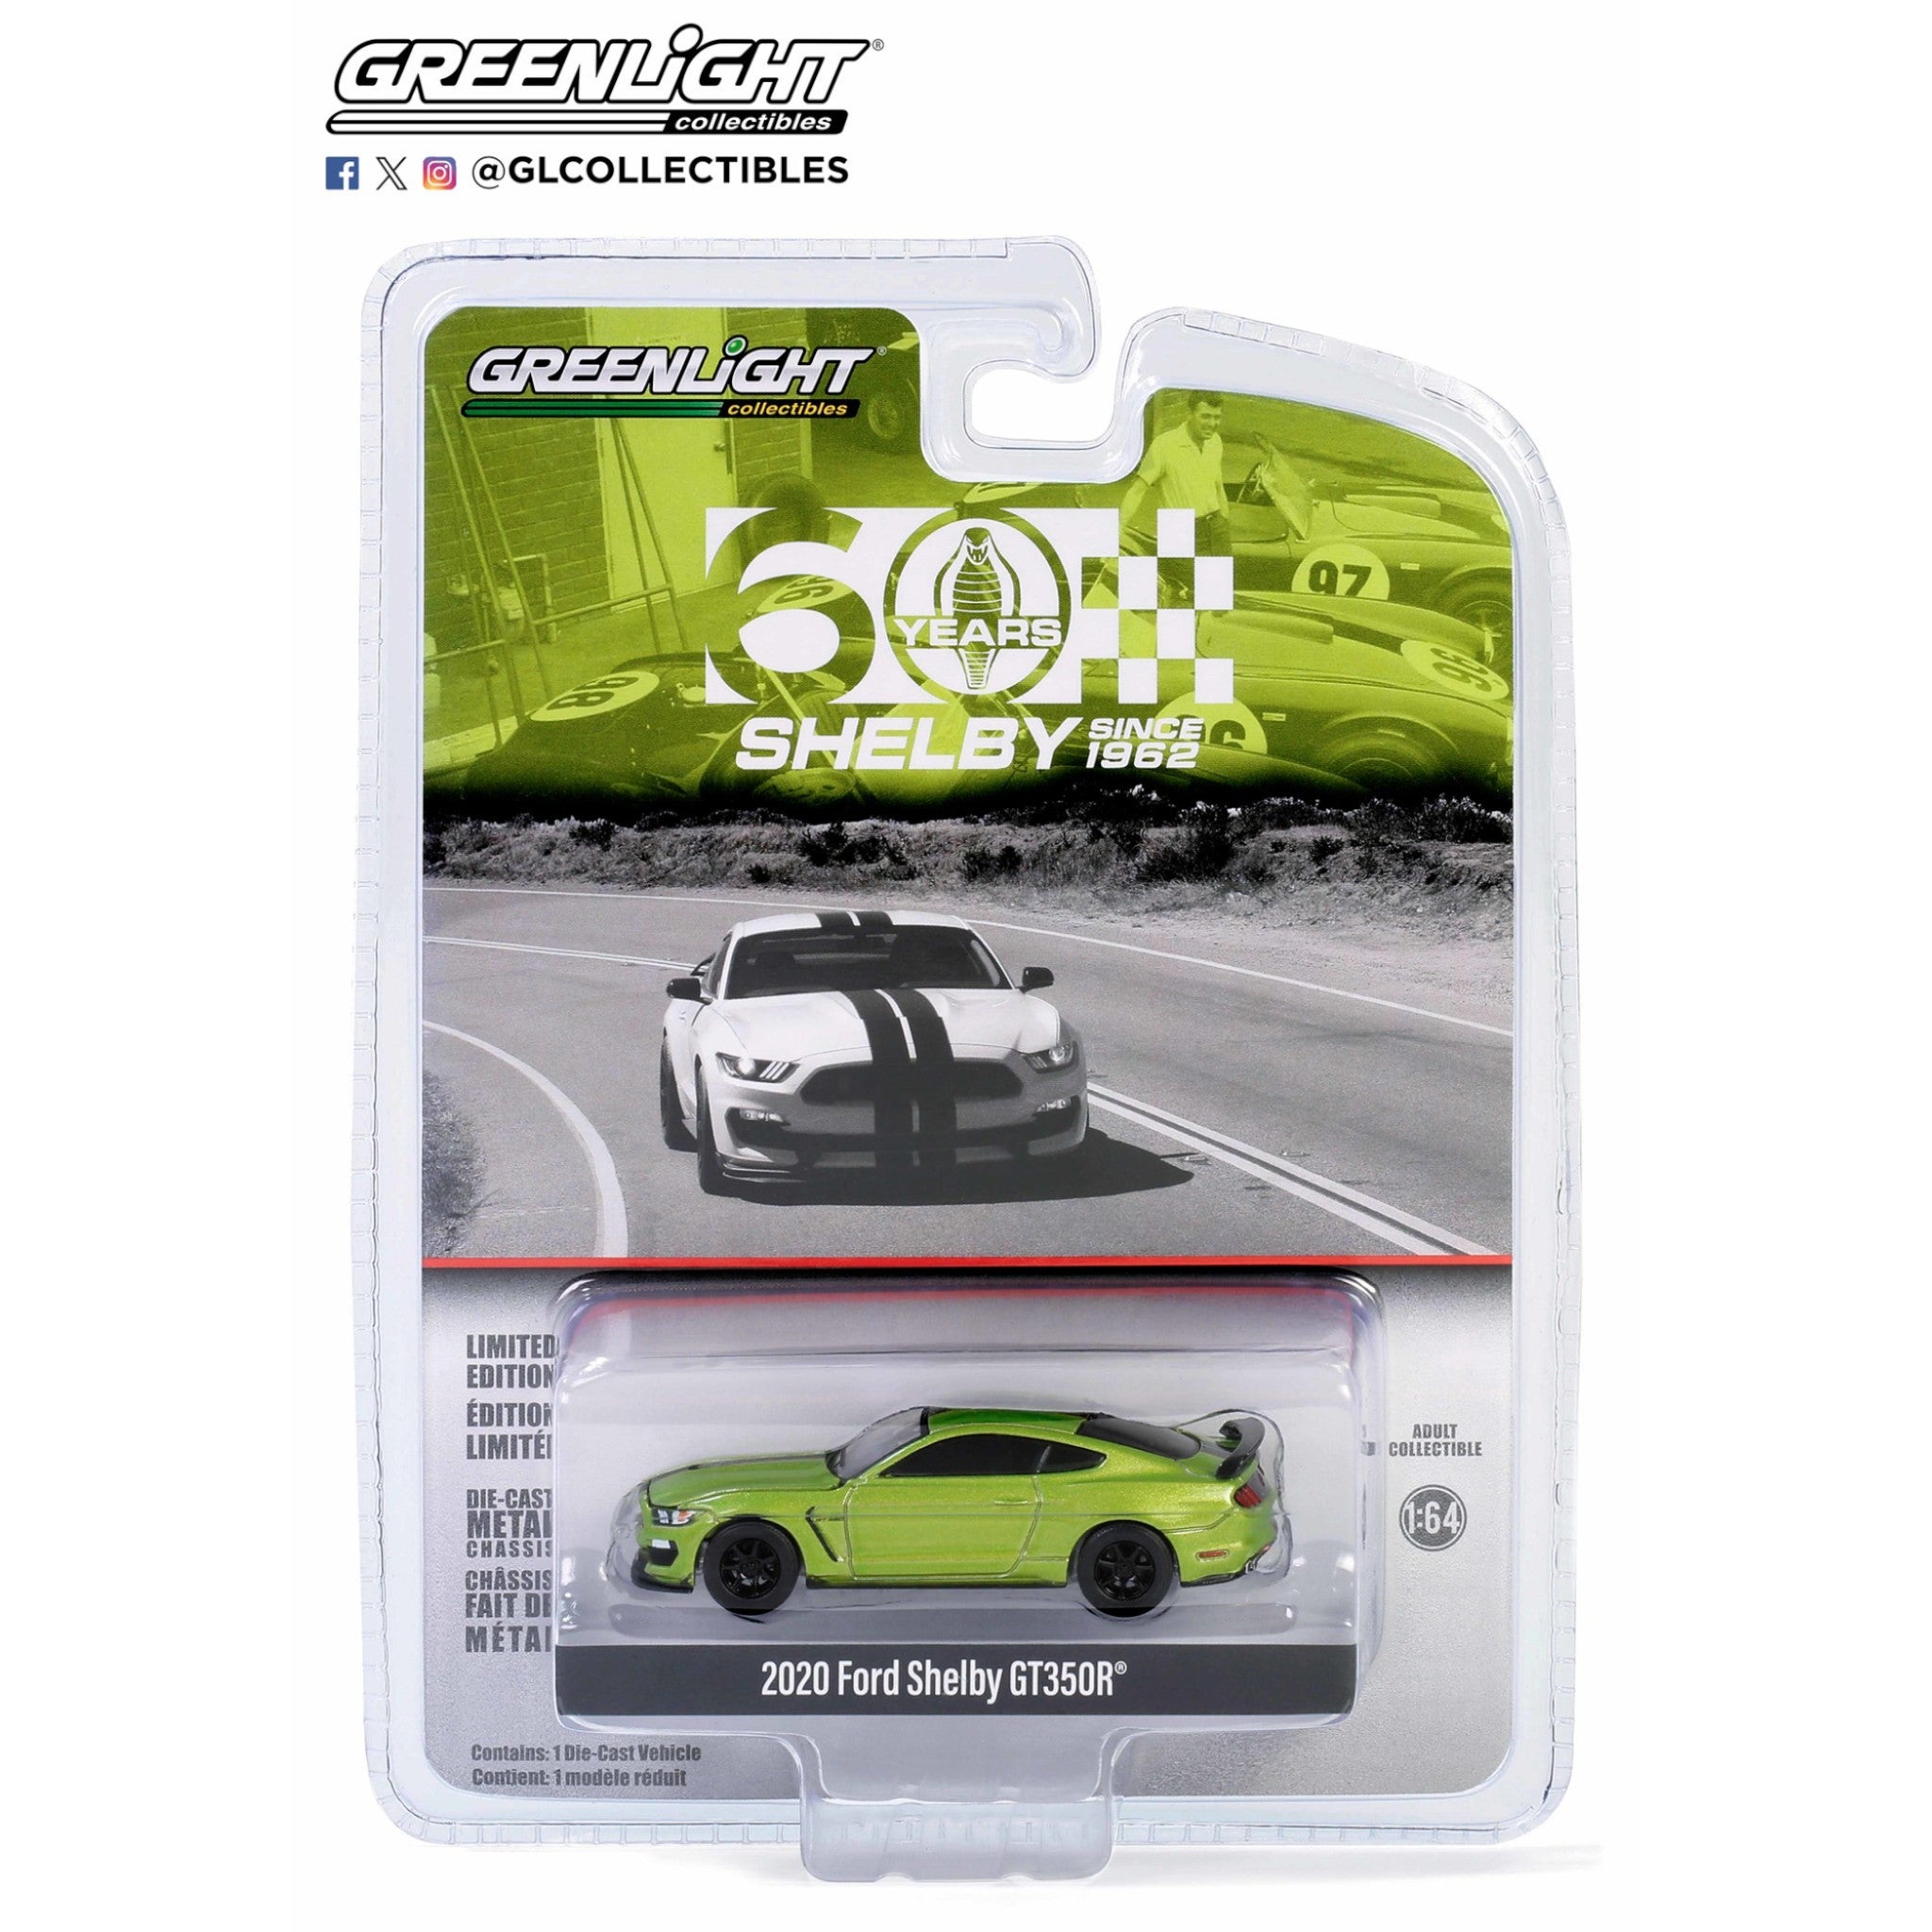 Greenlight - Pre-Order - 2020 Ford Shelby GT350R - 60 Years of Shelby - 28140-E